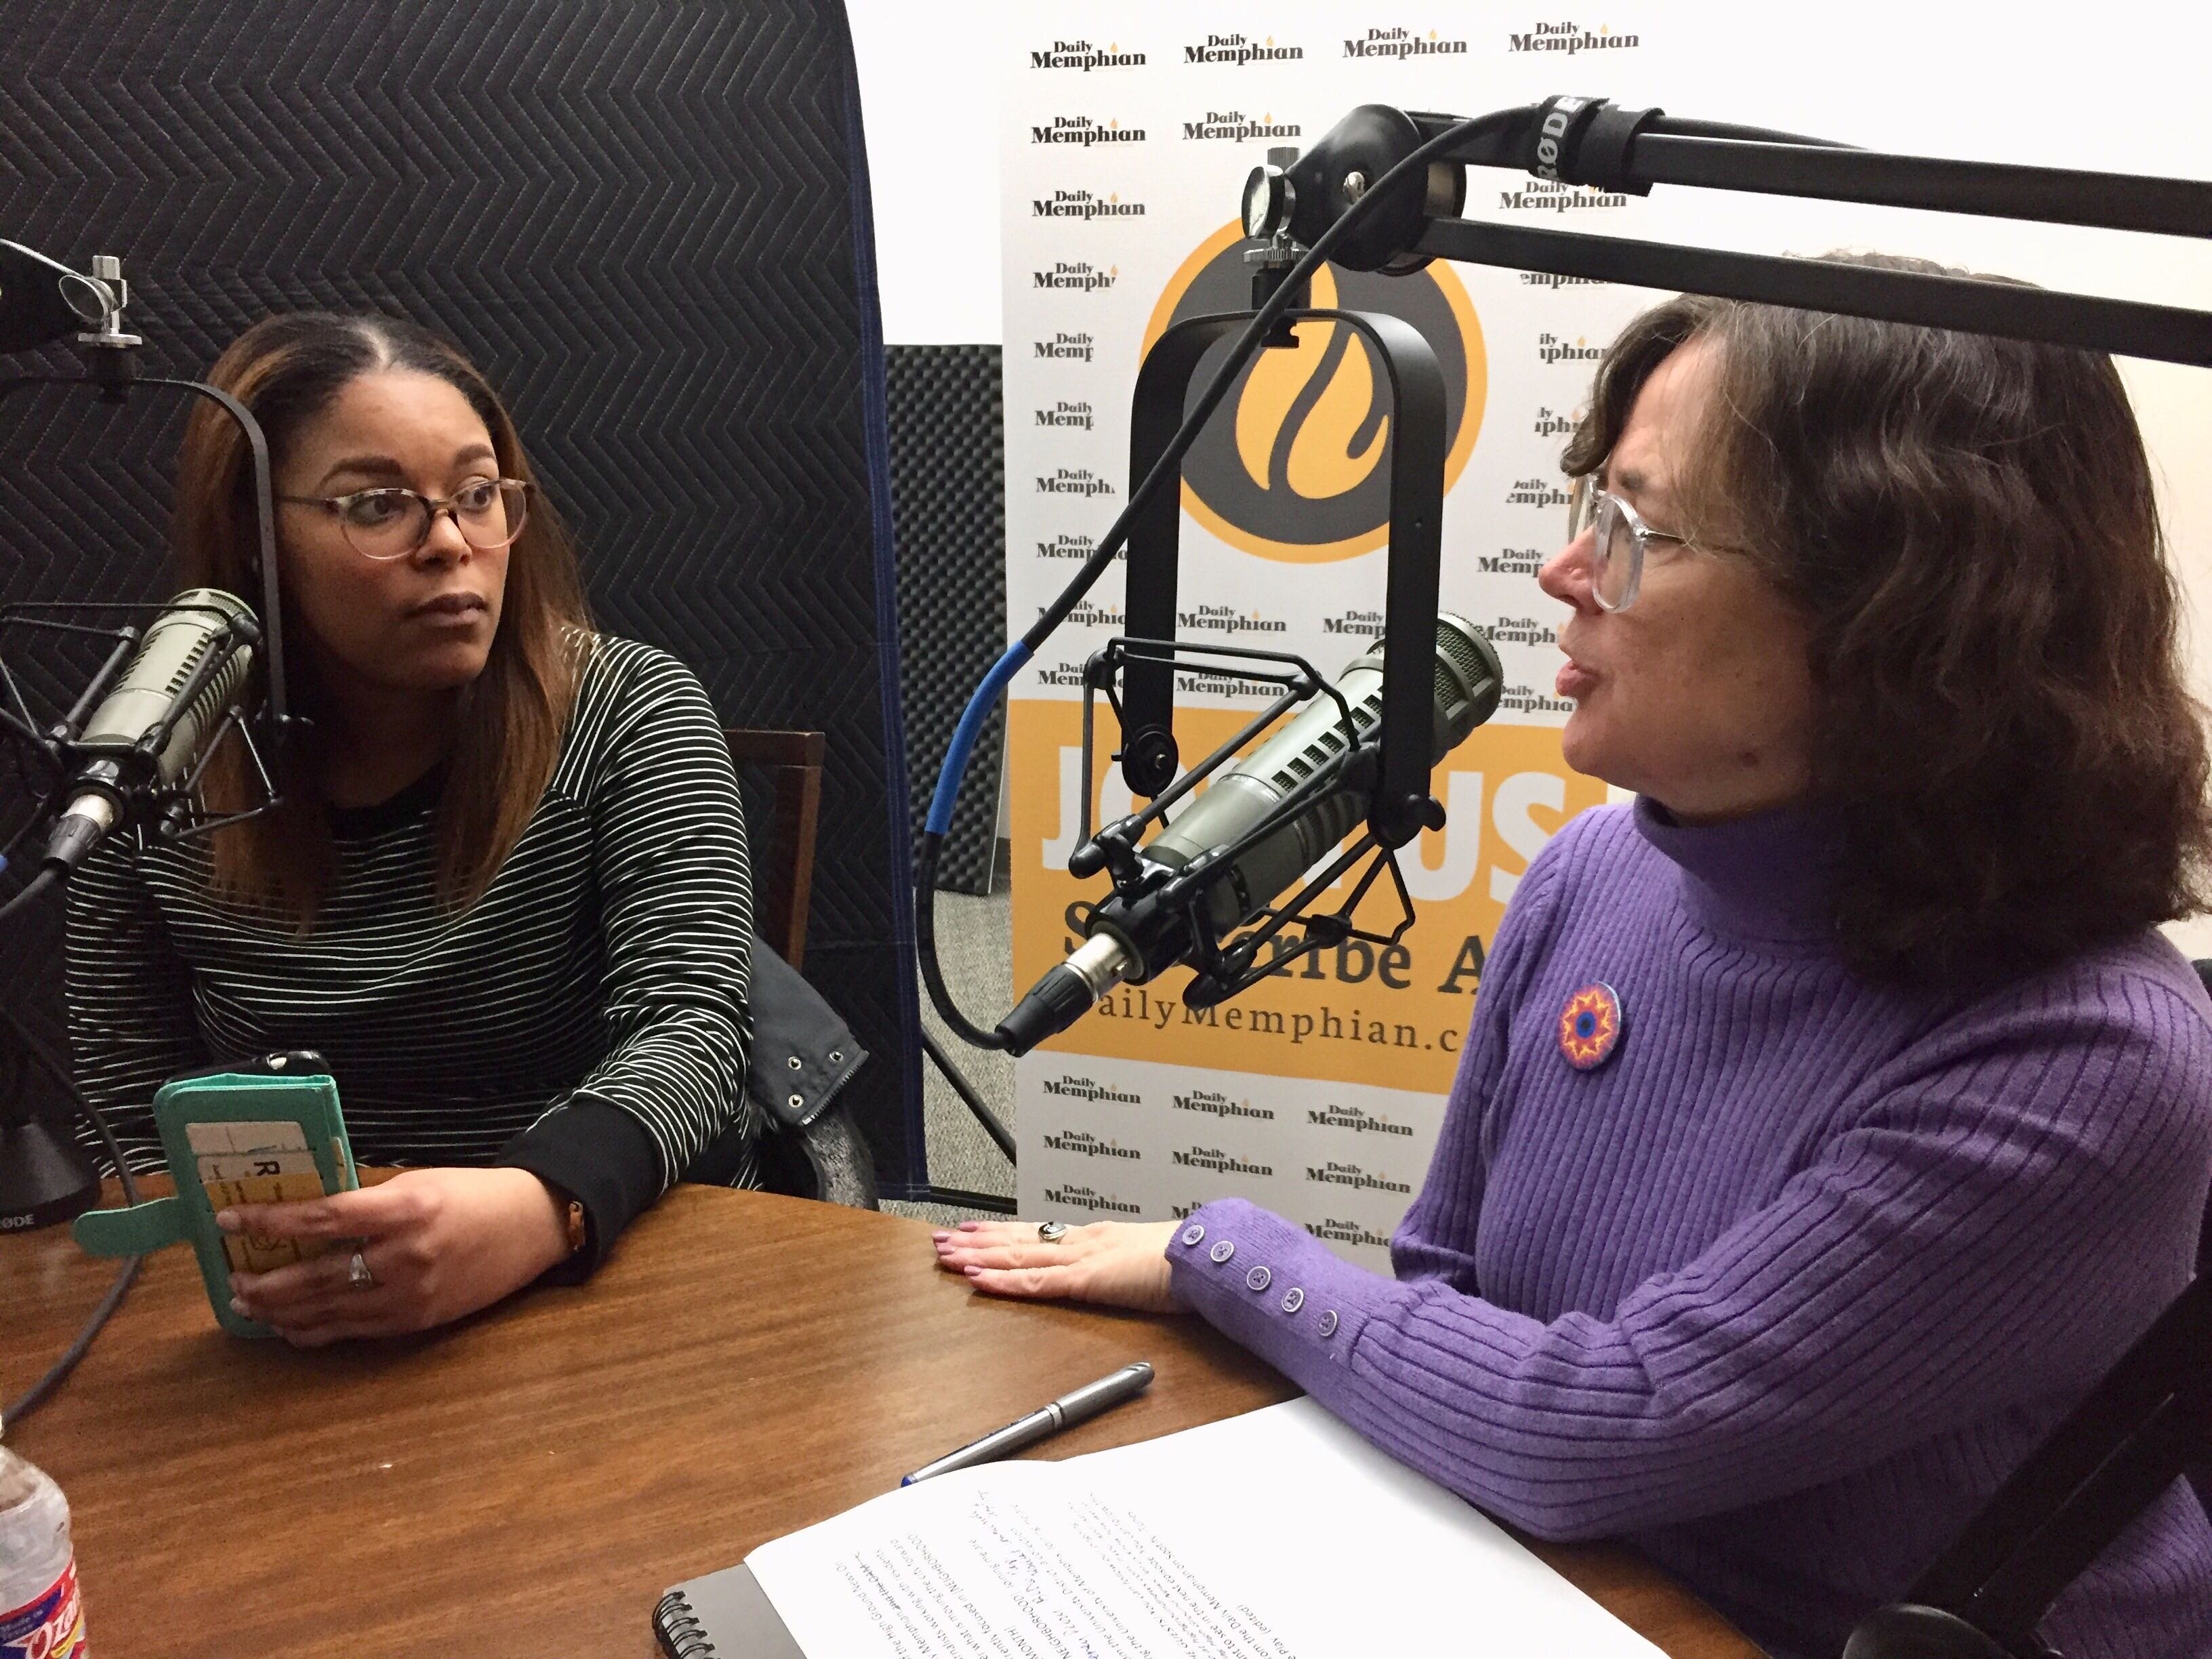 Deveney Perry with BLDG Memphis (L) and High Ground's Emily Trenholm discuss the assets and challenges of North Memphis at the On the Ground Podcast recording. (Natalie Van Gundy)